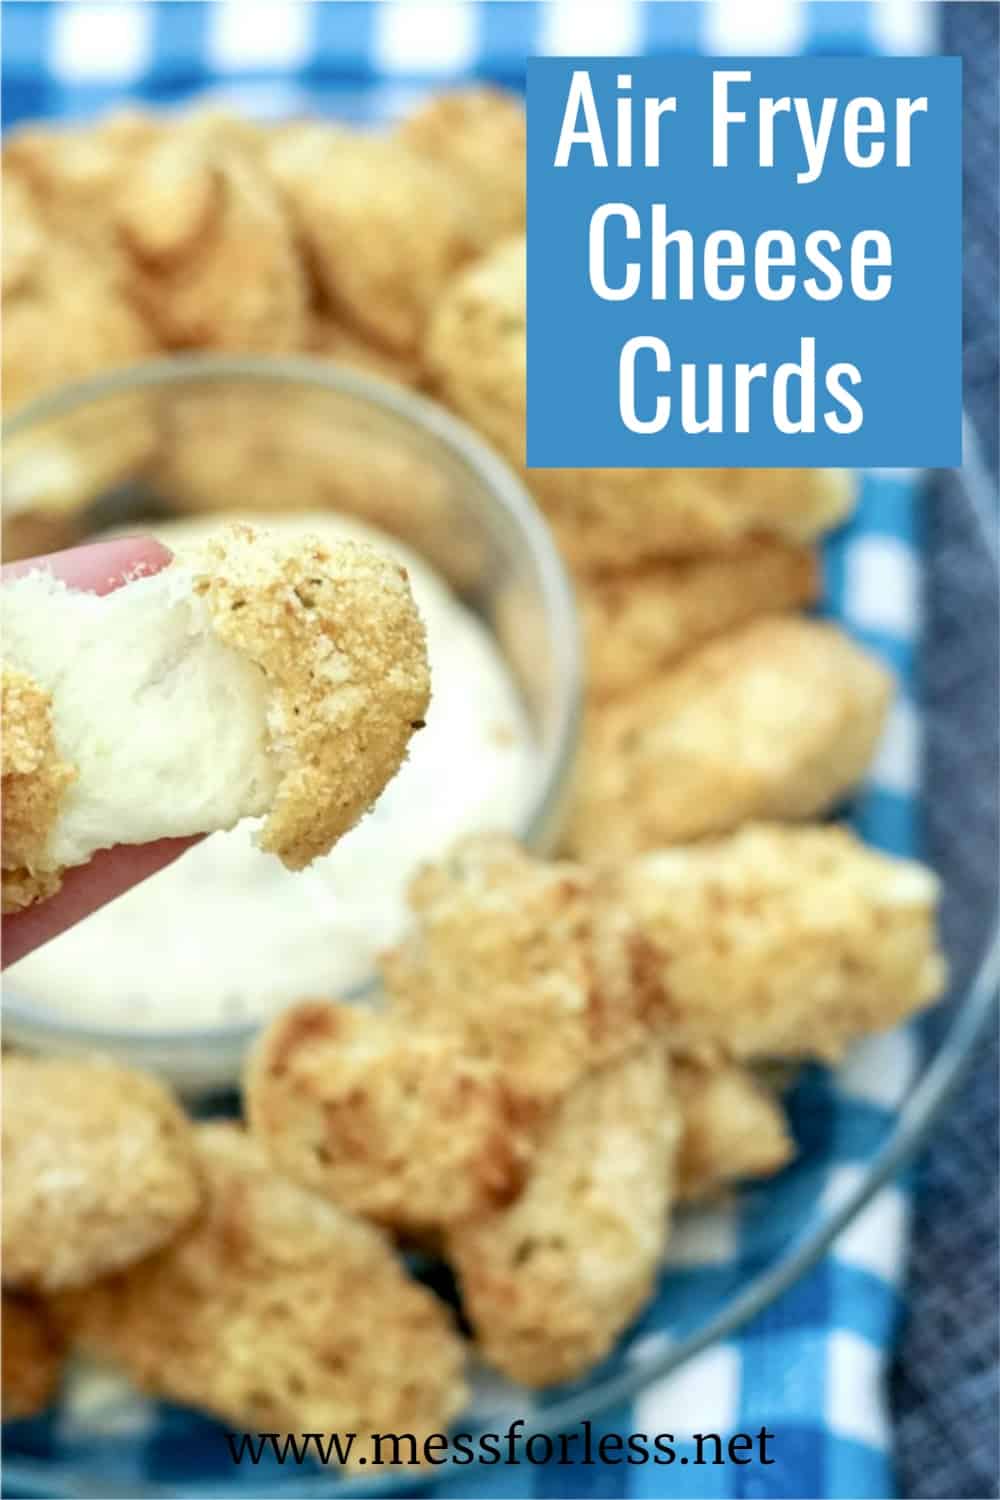 holding up an open cheese curd